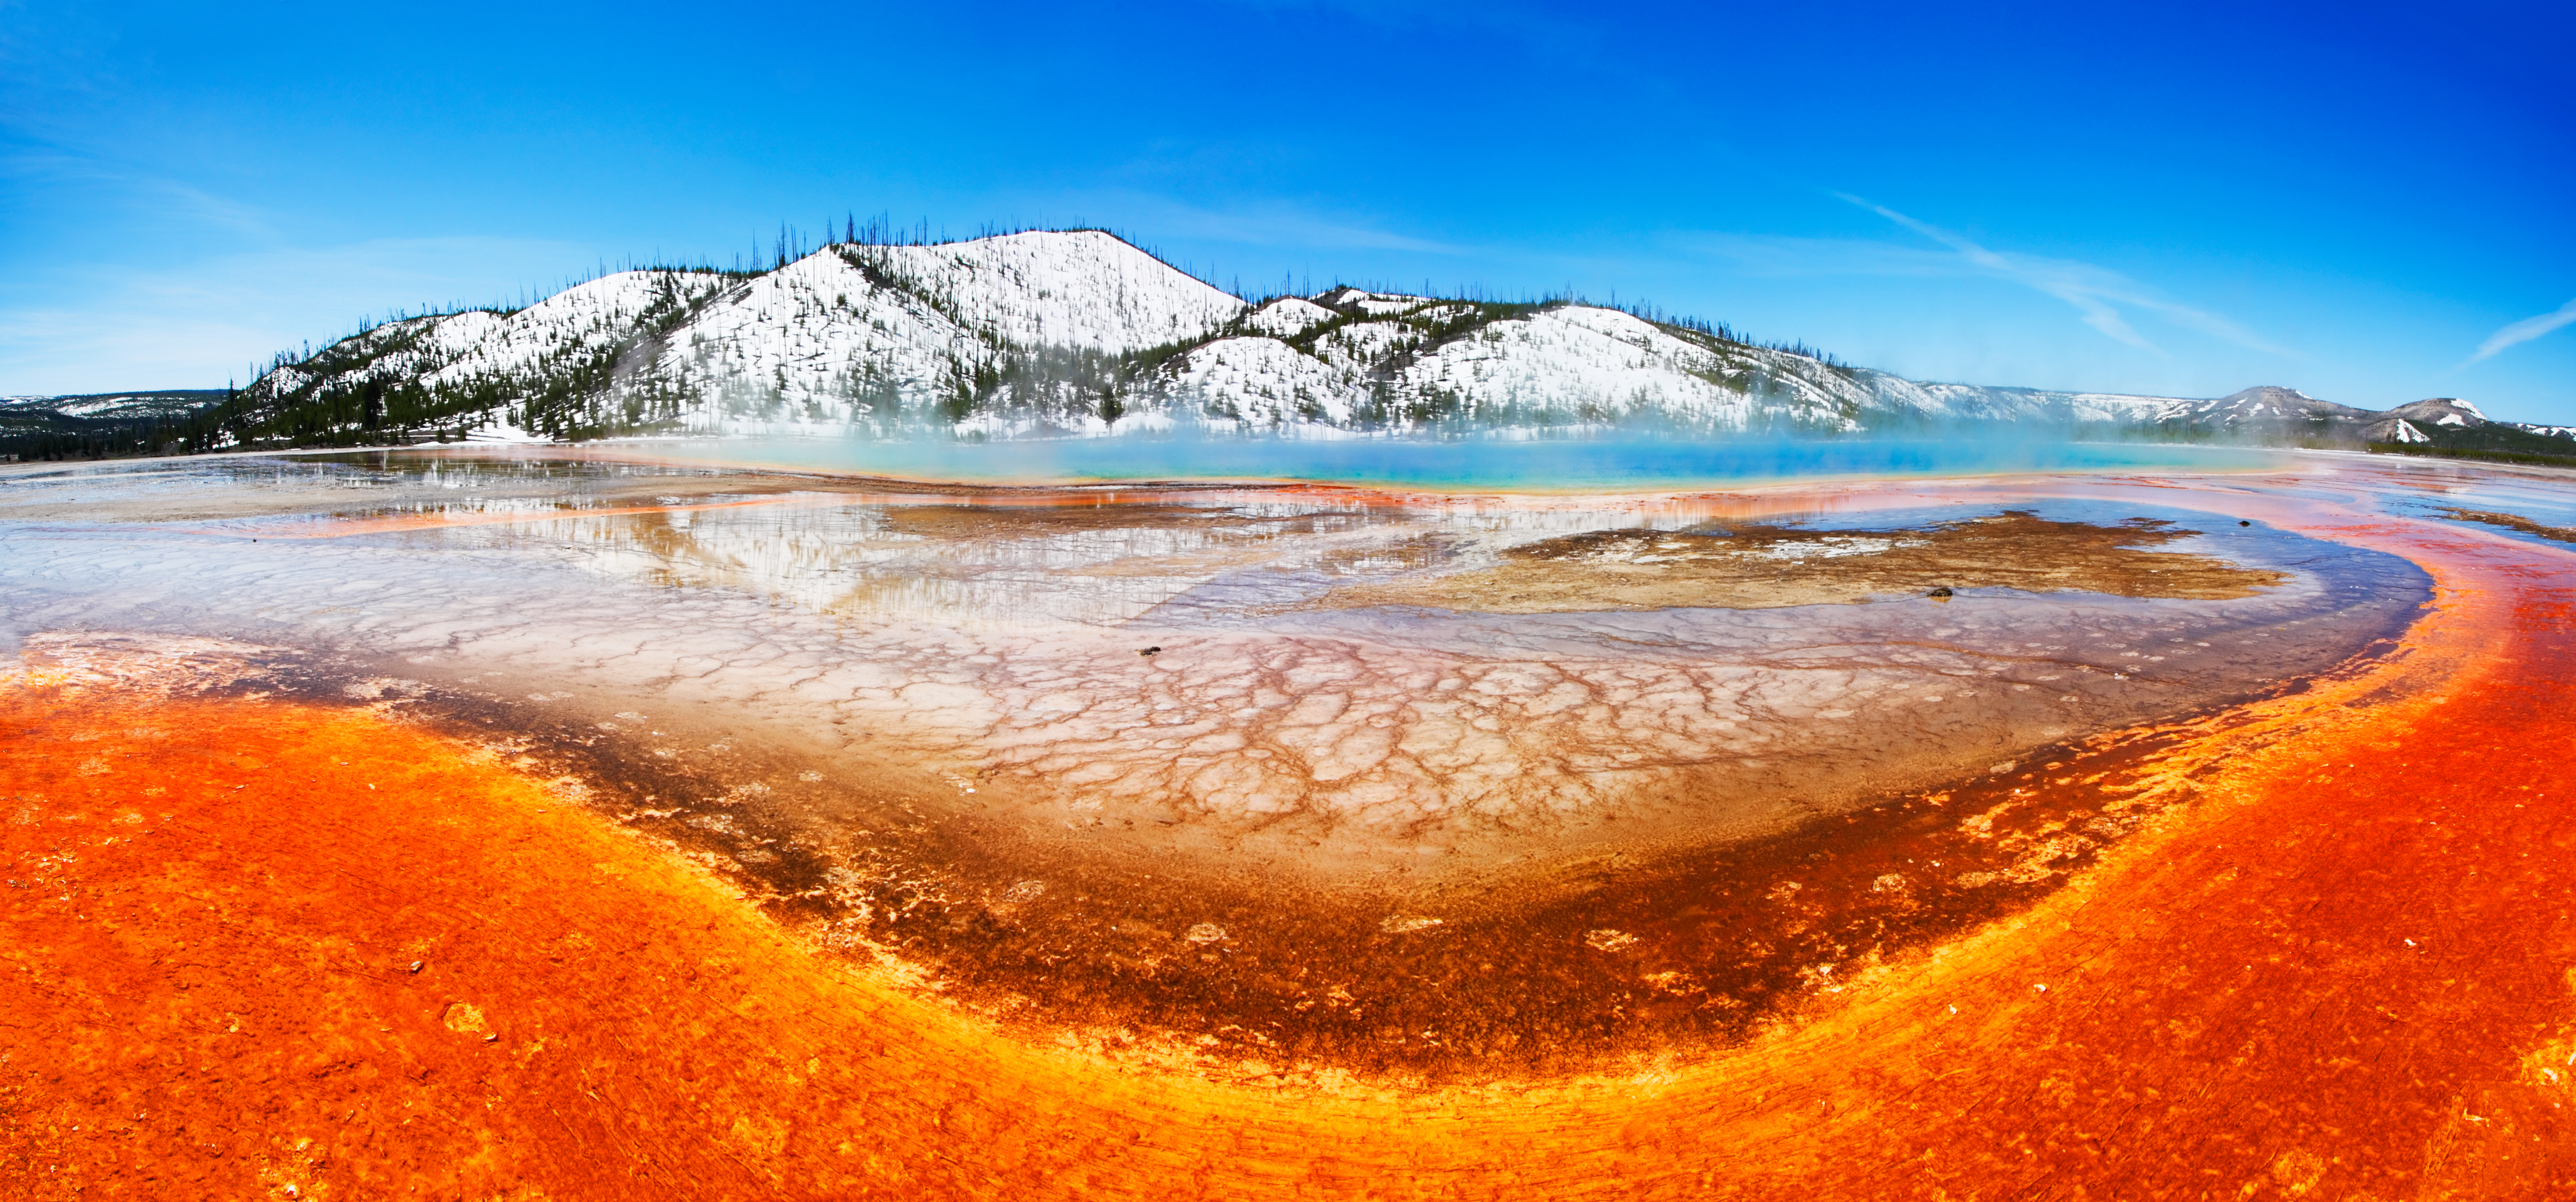 The colorful Grand Prismatic Spring (of Midway Geyser Basin) - Yellowstone National Park. - Image